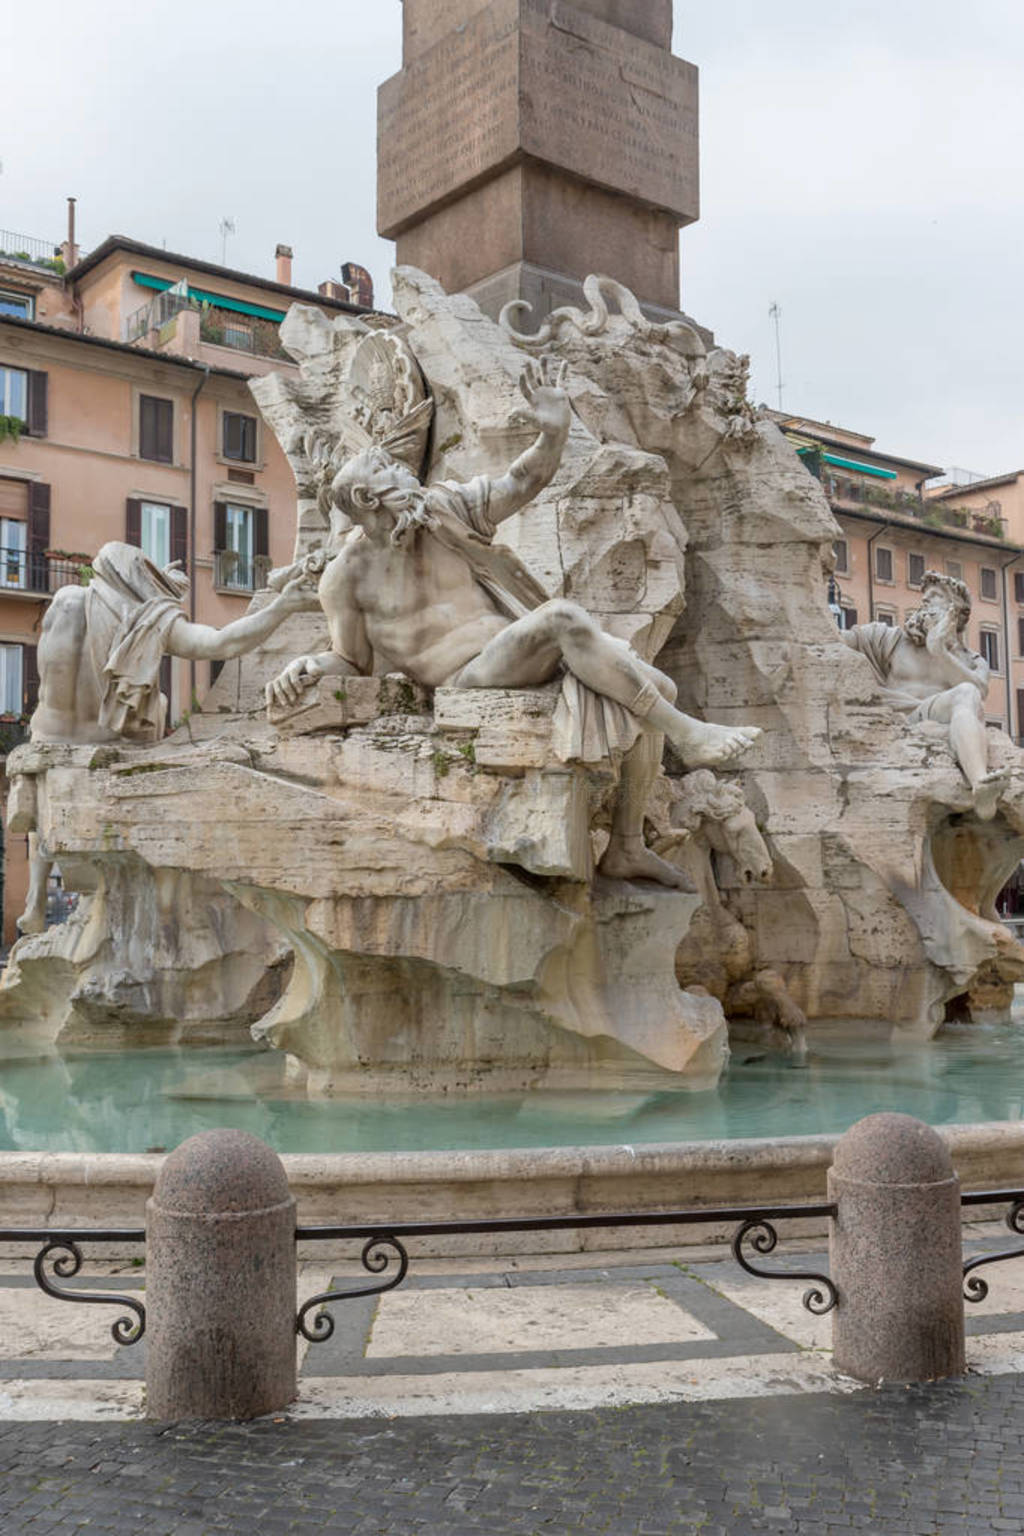 Statue of the god Zeus in Bernini's Fountain of the Four Rivers